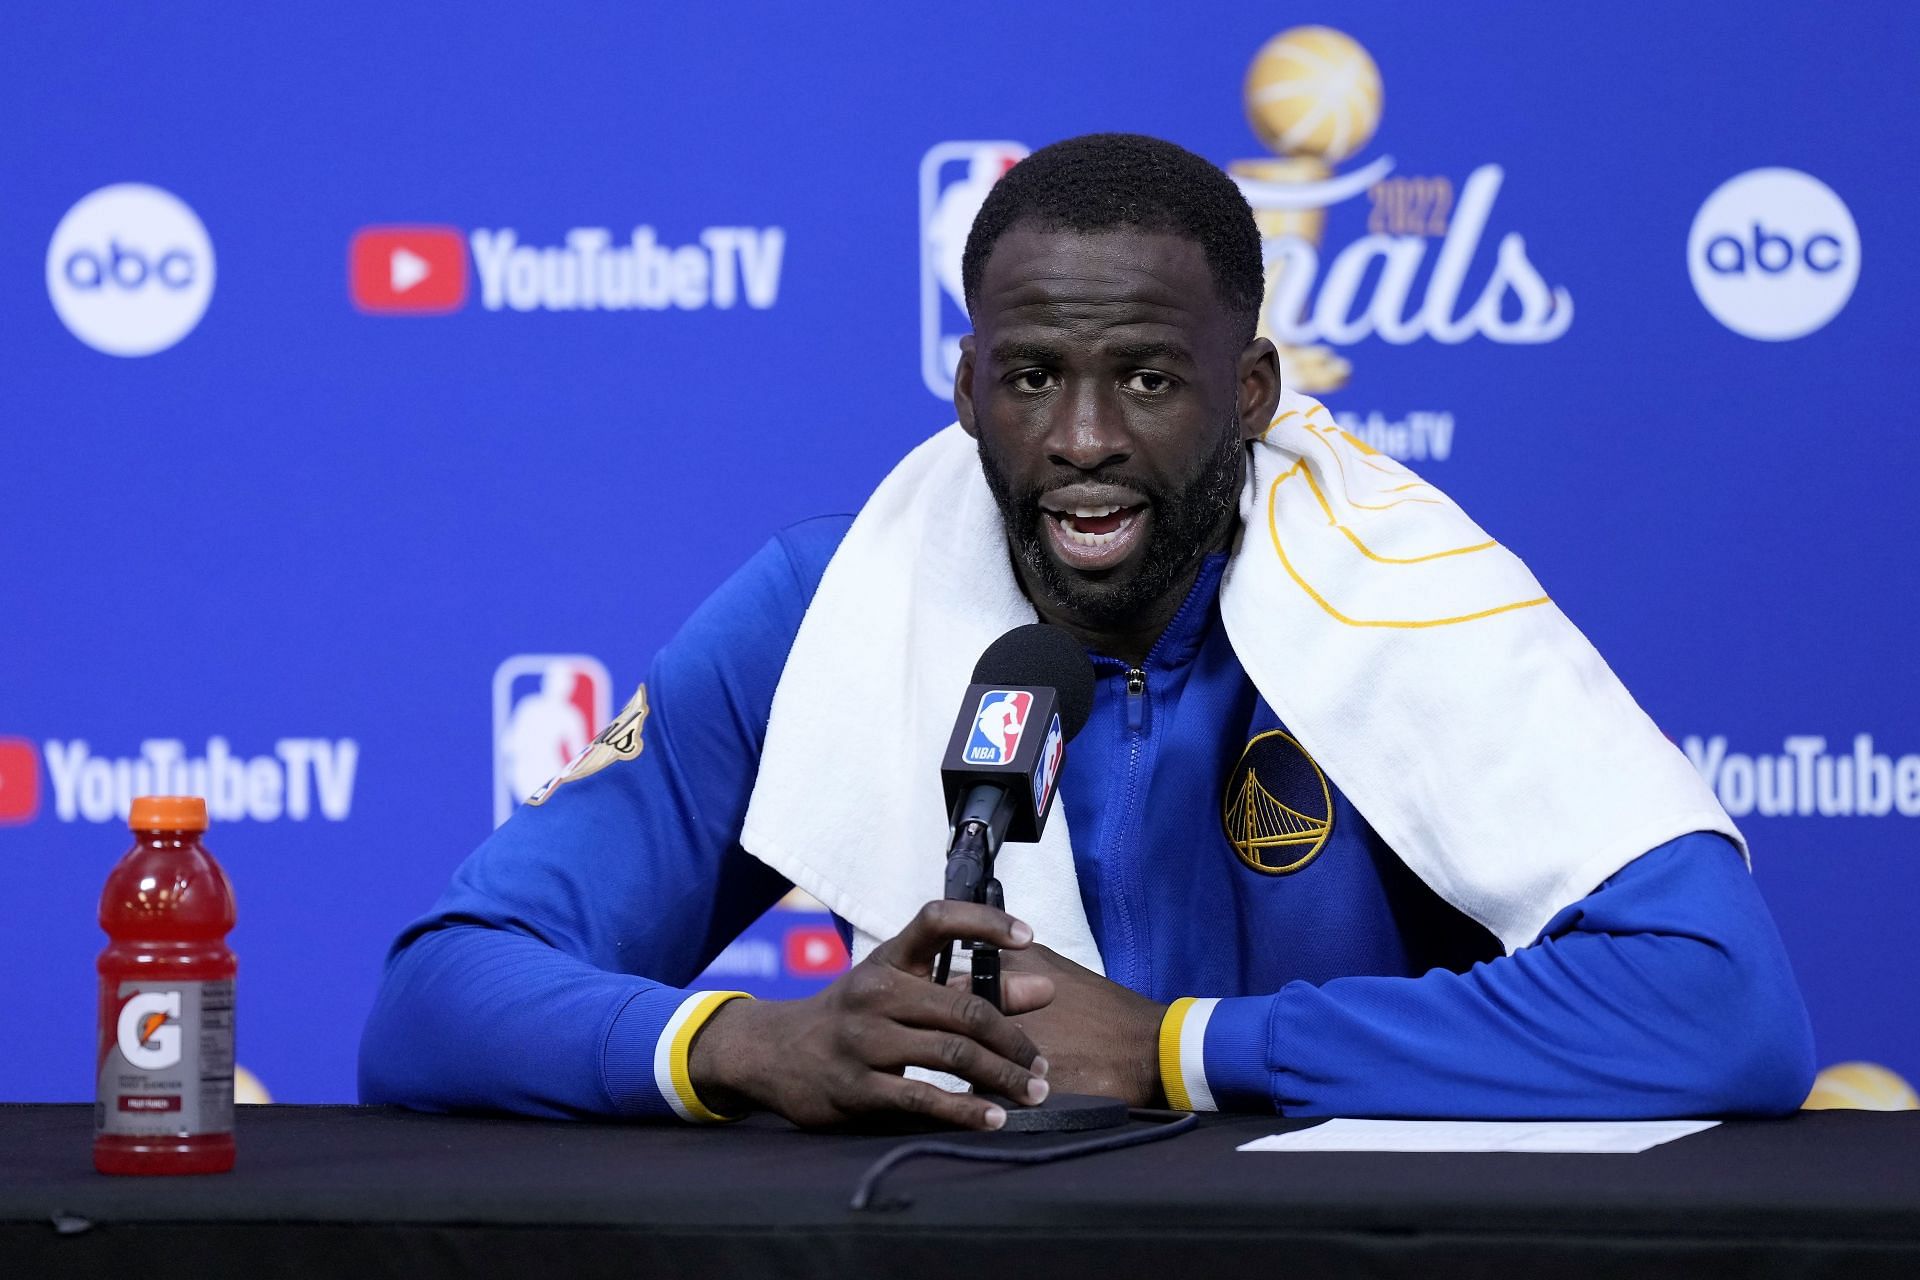 Draymond Green was in awe of Kobe Bryant and Grant Hill when he came into the NBA.